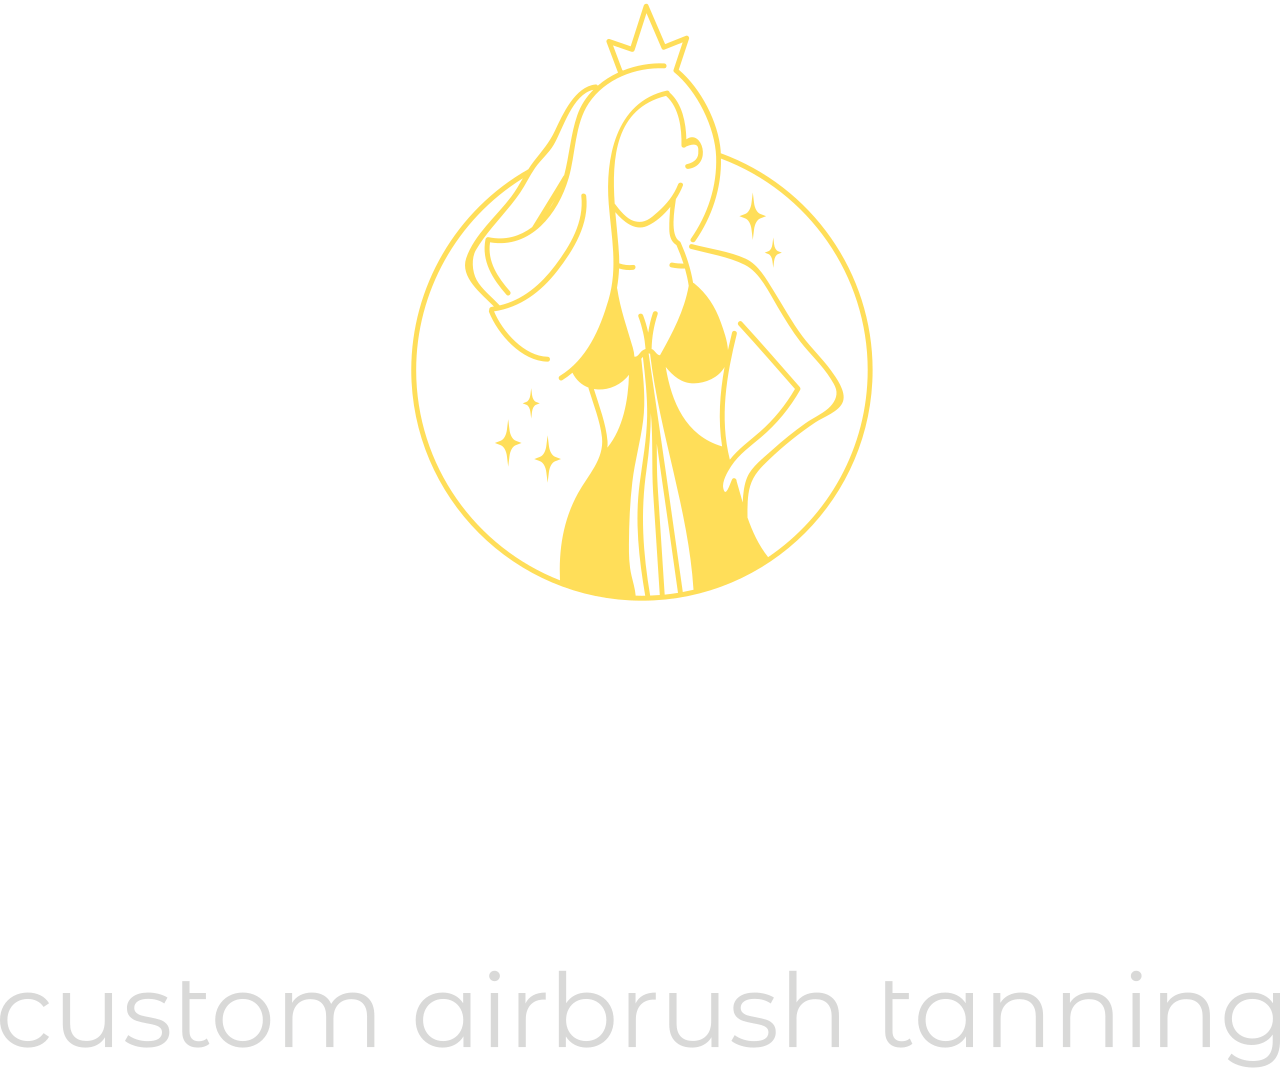 Get Glowing 's web page